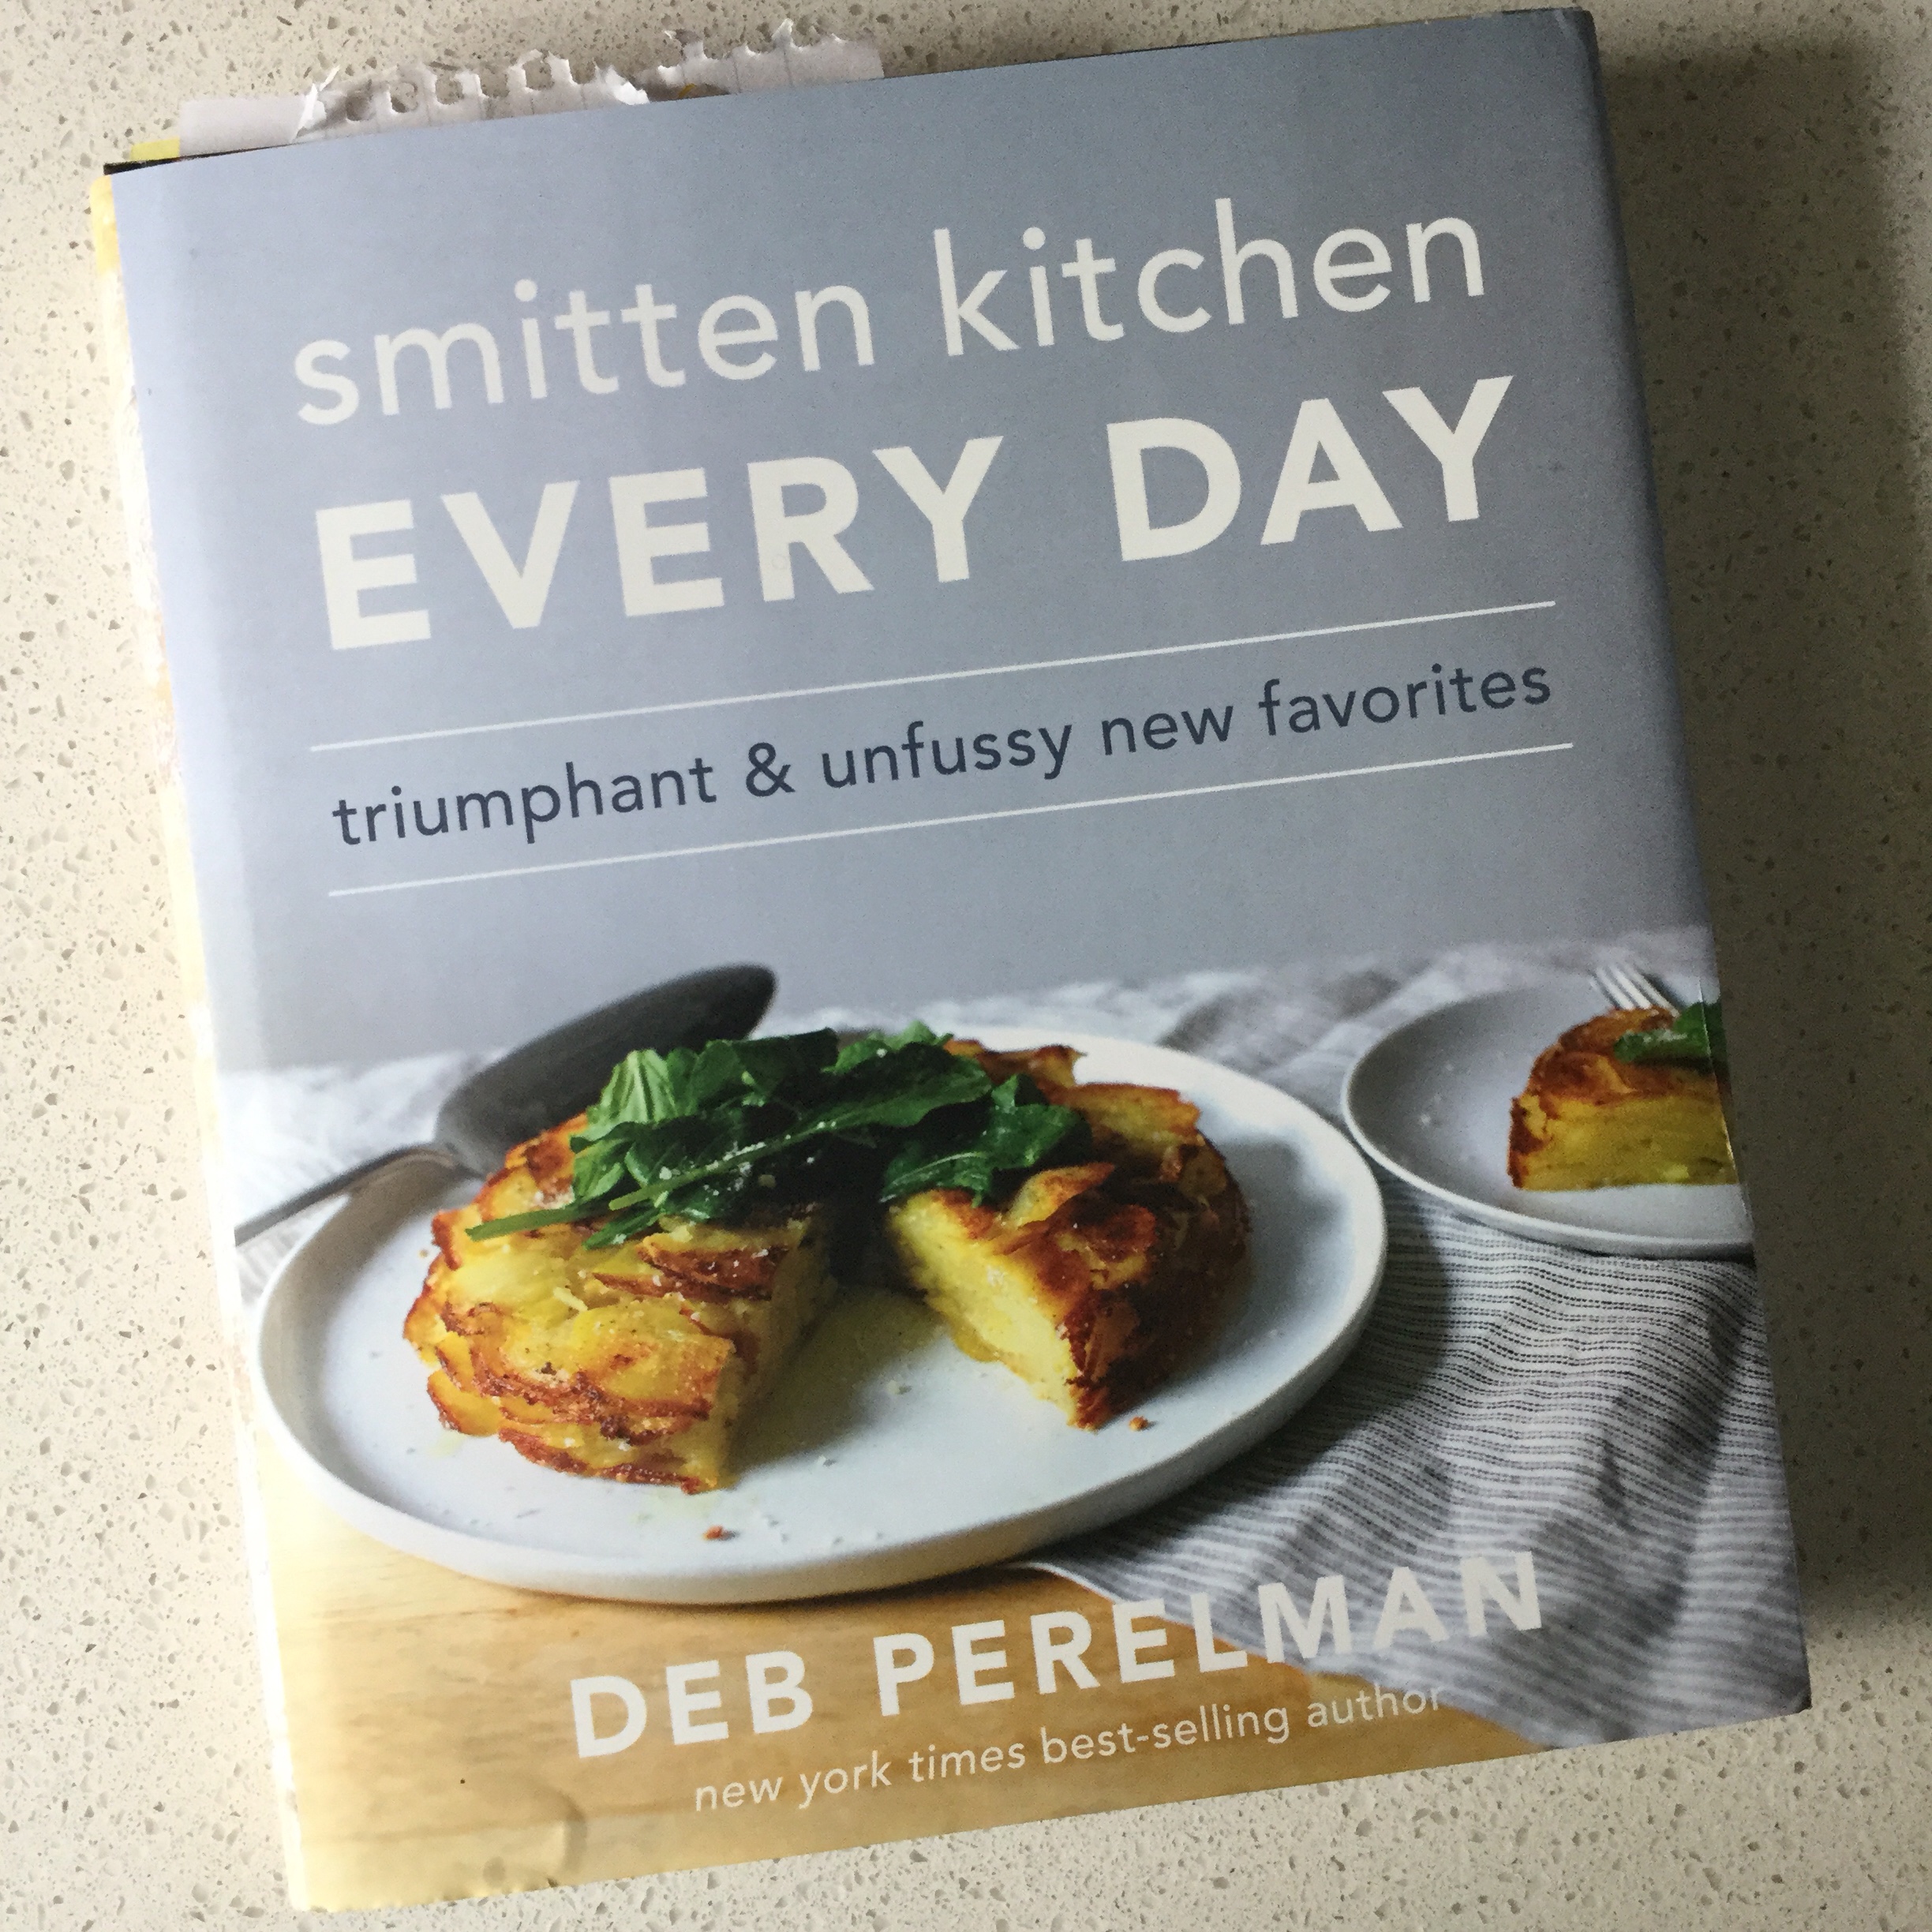 Book Club Tuesday Smitten Kitchen Every Day Shipshape Eatworthy